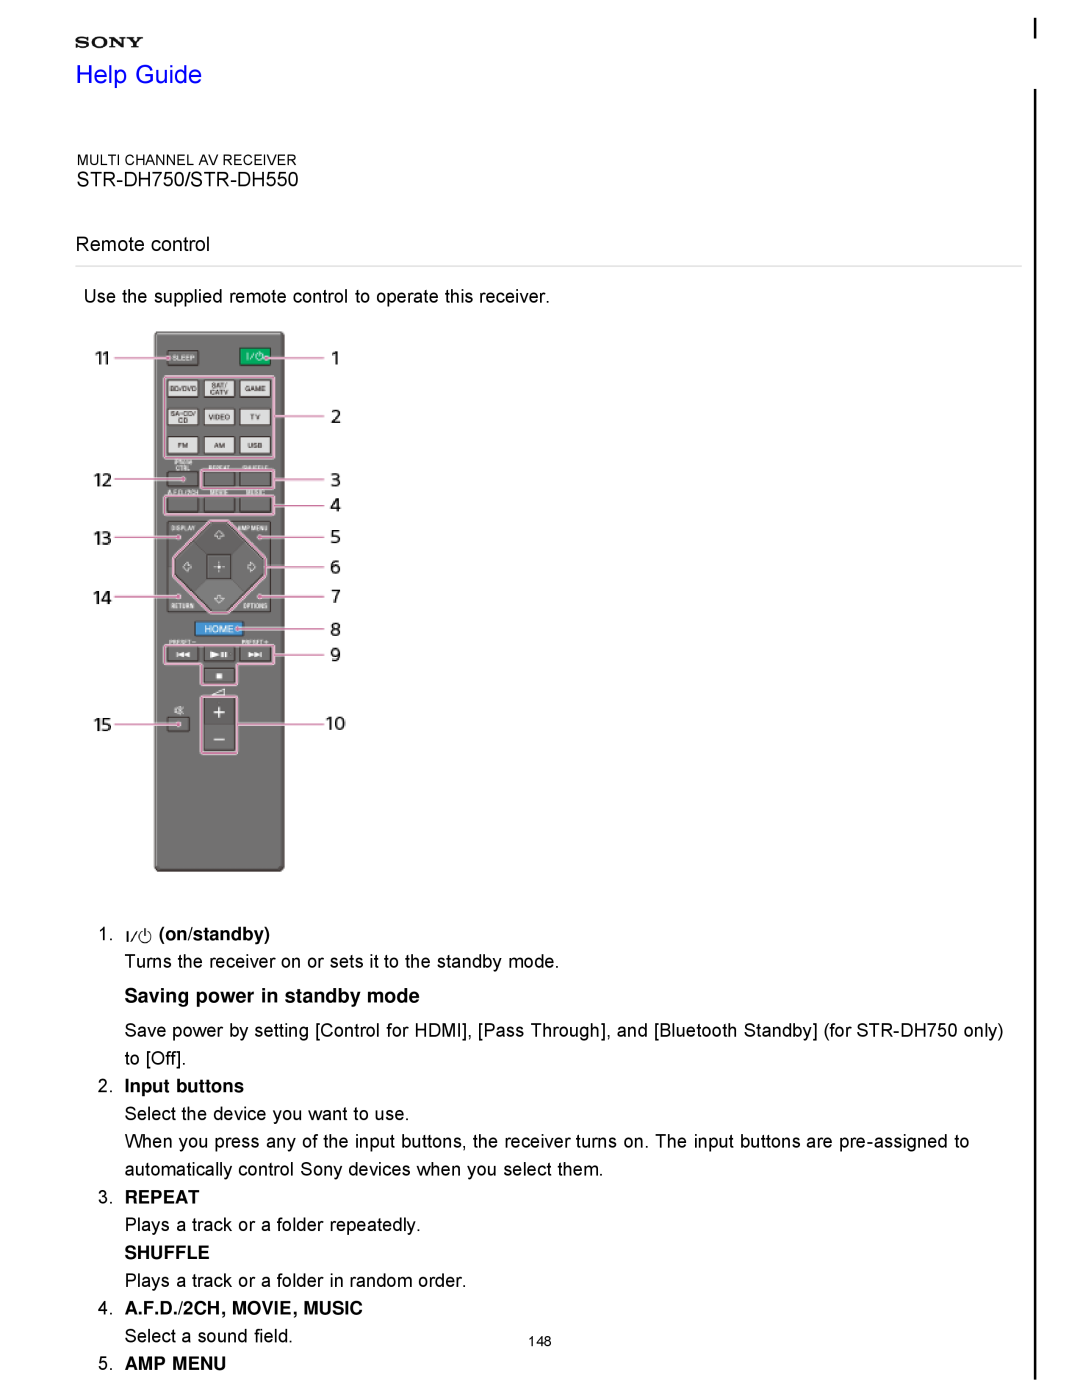 Sony STR-FH750 Saving power in standby mode, Help Guide, STR-DH750/STR-DH550 Remote control, 1.on/standby, Input buttons 